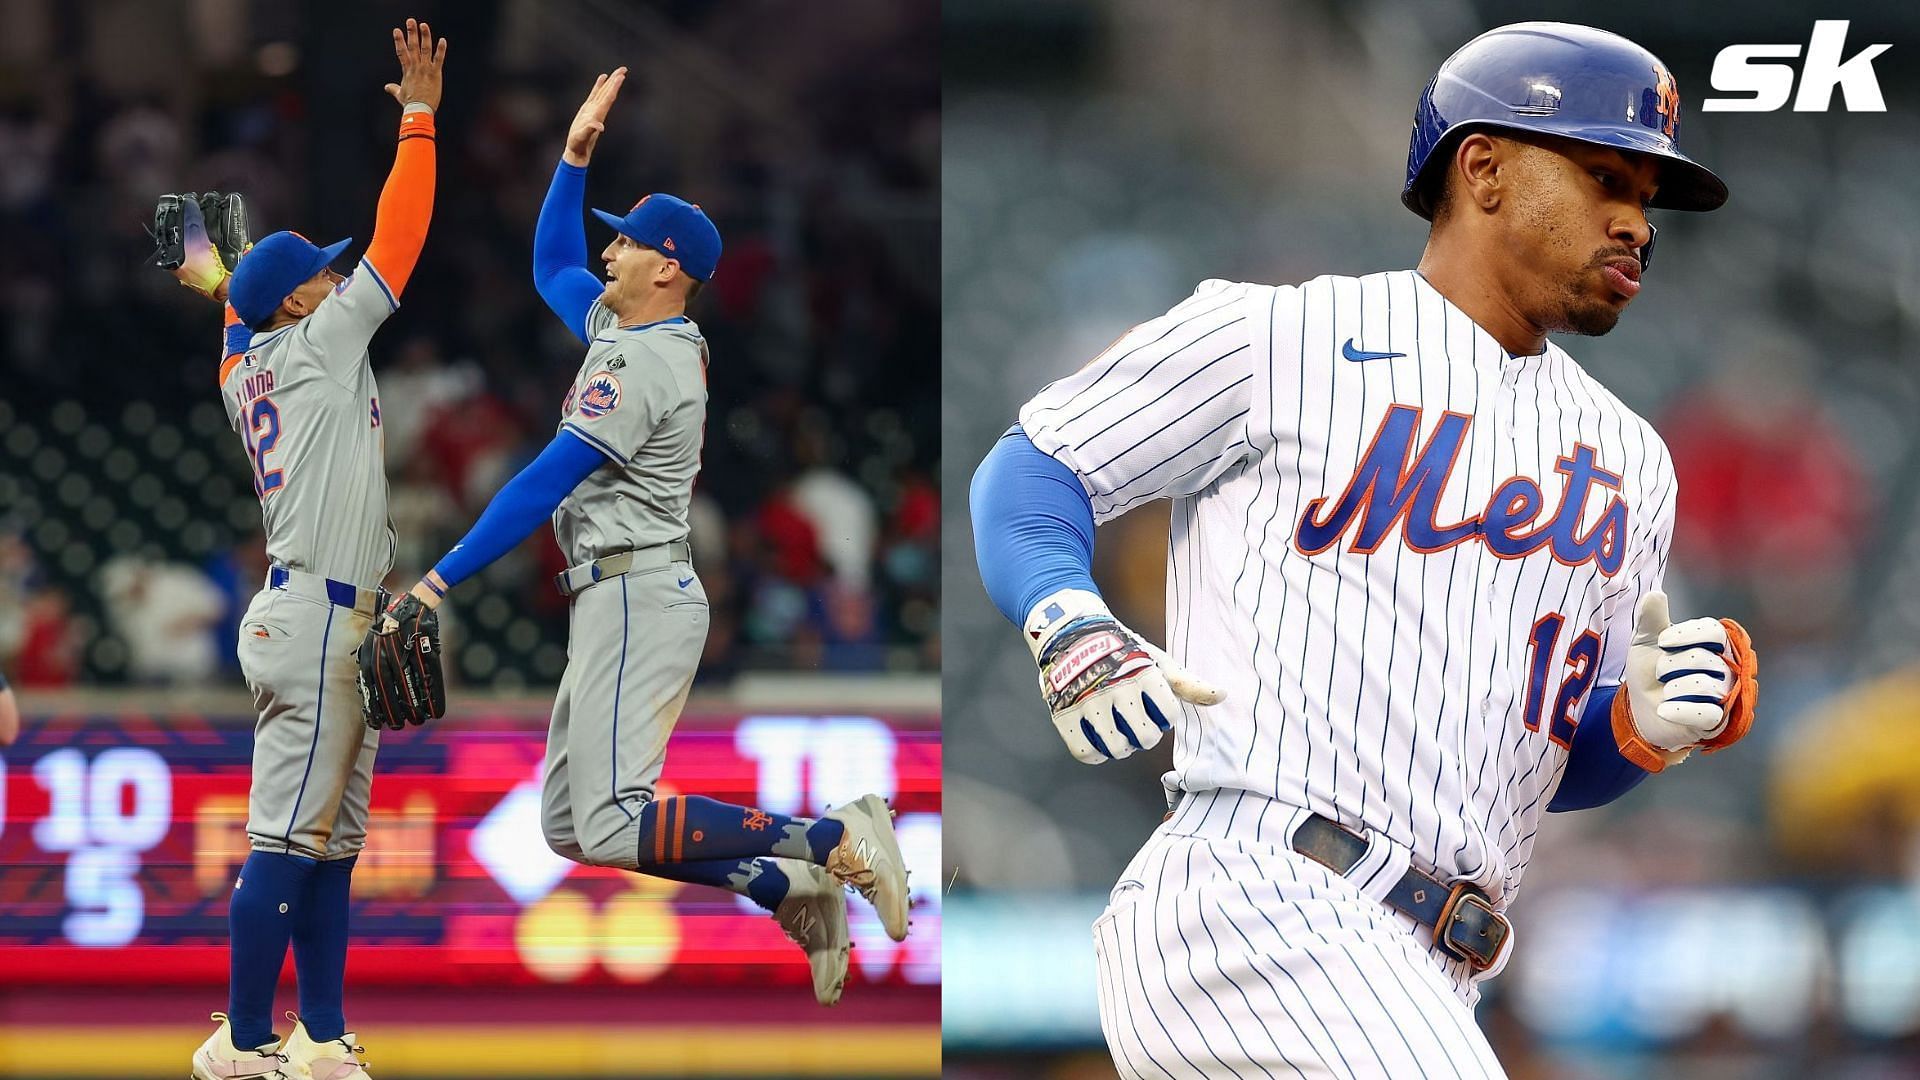 The New York Mets fans gave Franciso Lindor a standing ovation to try and help him break out of his slump